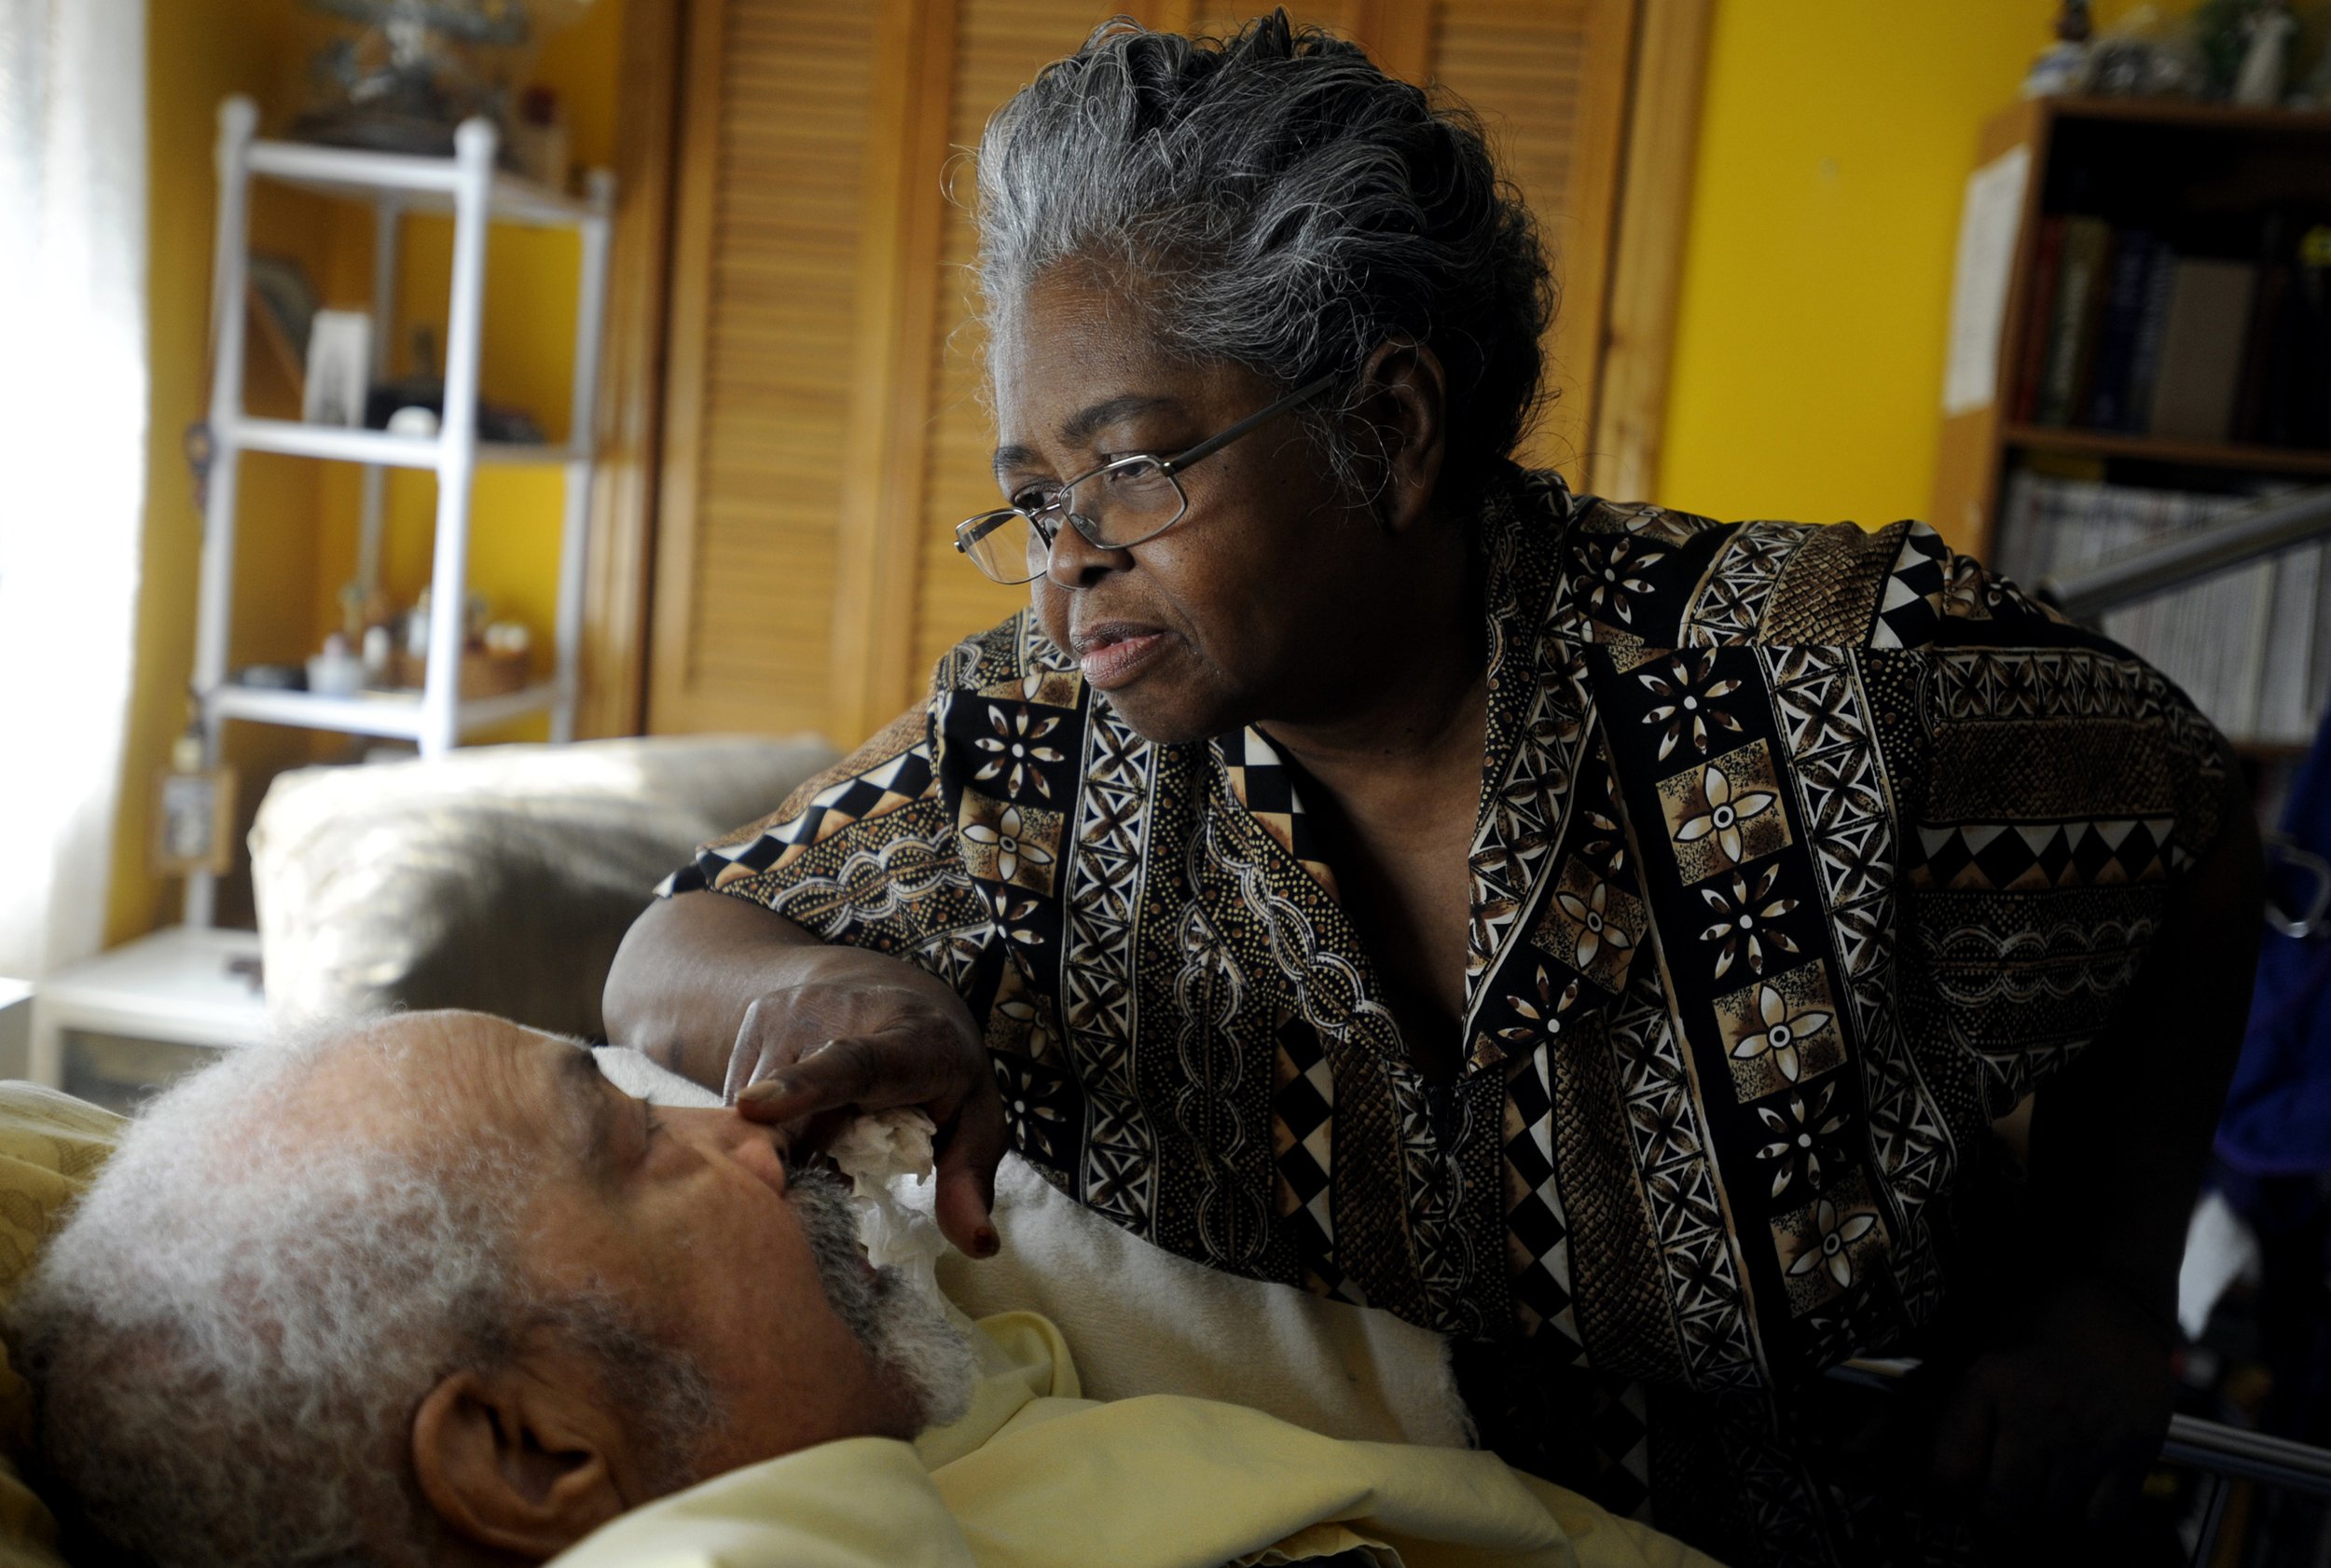  "He's not like he was, but I roll with the punches. You got to enjoy the time you have left," Jean Alexander said after checking on her husband, Carl, in their bedroom. Jean has been caring for Carl, who has Parkinson's related dementia and diabetes